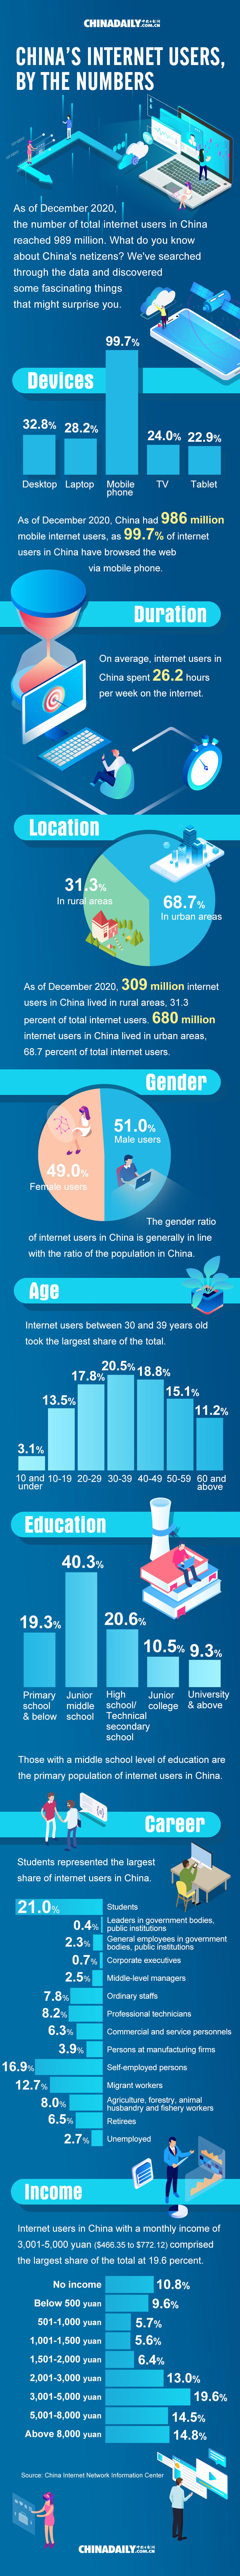 China's internet users, by the number.jpeg